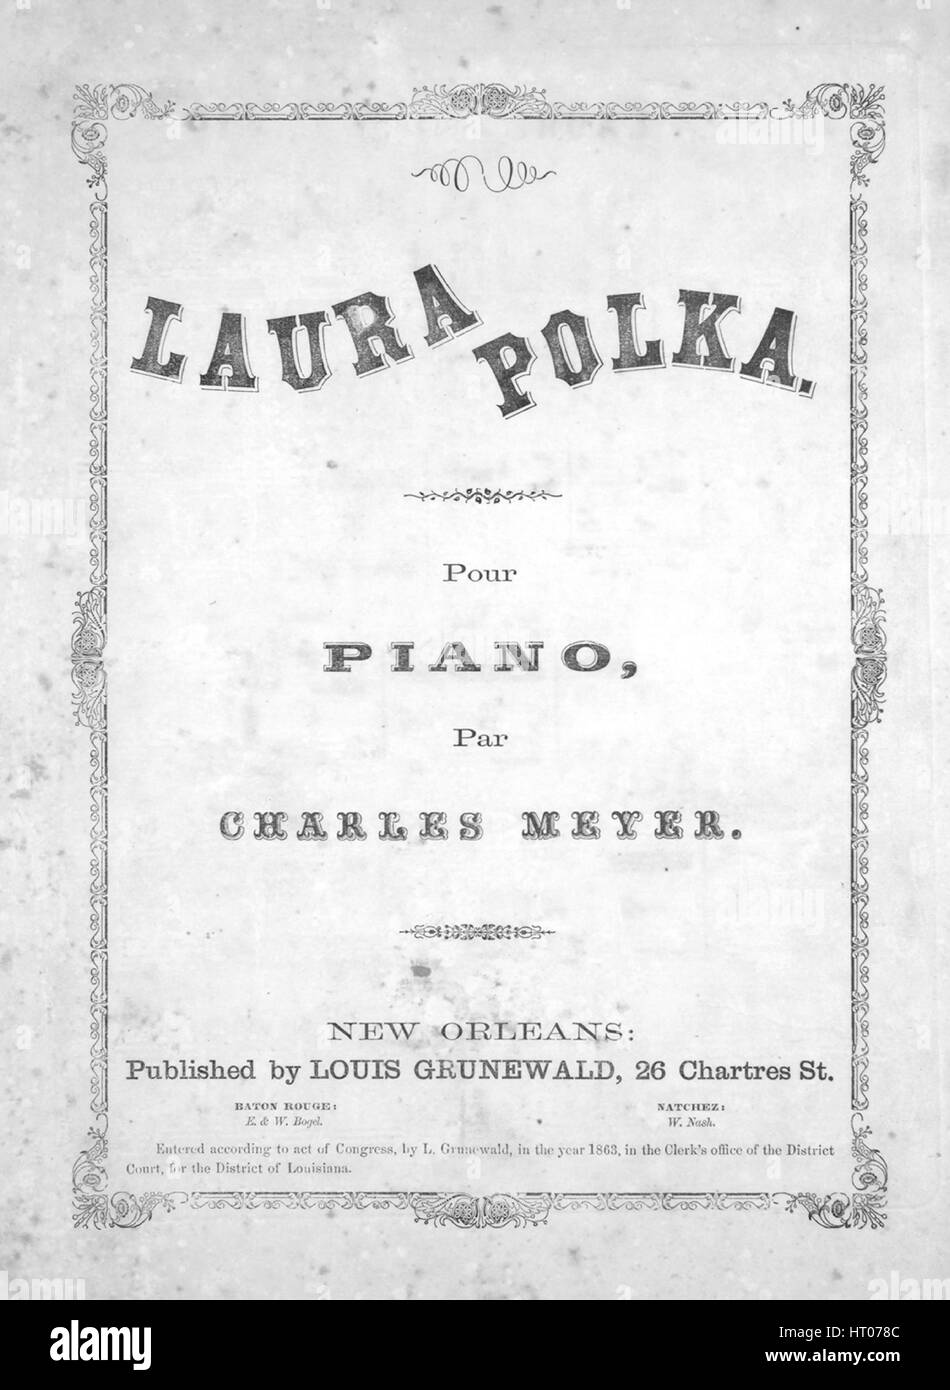 Sheet music cover image of the song 'Laura Polka Pour Piano', with original authorship notes reading 'Par Charles Meyer', 1863. The publisher is listed as 'Louis Grunewald, 26 Chartres St.', the form of composition is 'da capo', the instrumentation is 'piano', the first line reads 'None', and the illustration artist is listed as 'None'. Stock Photo